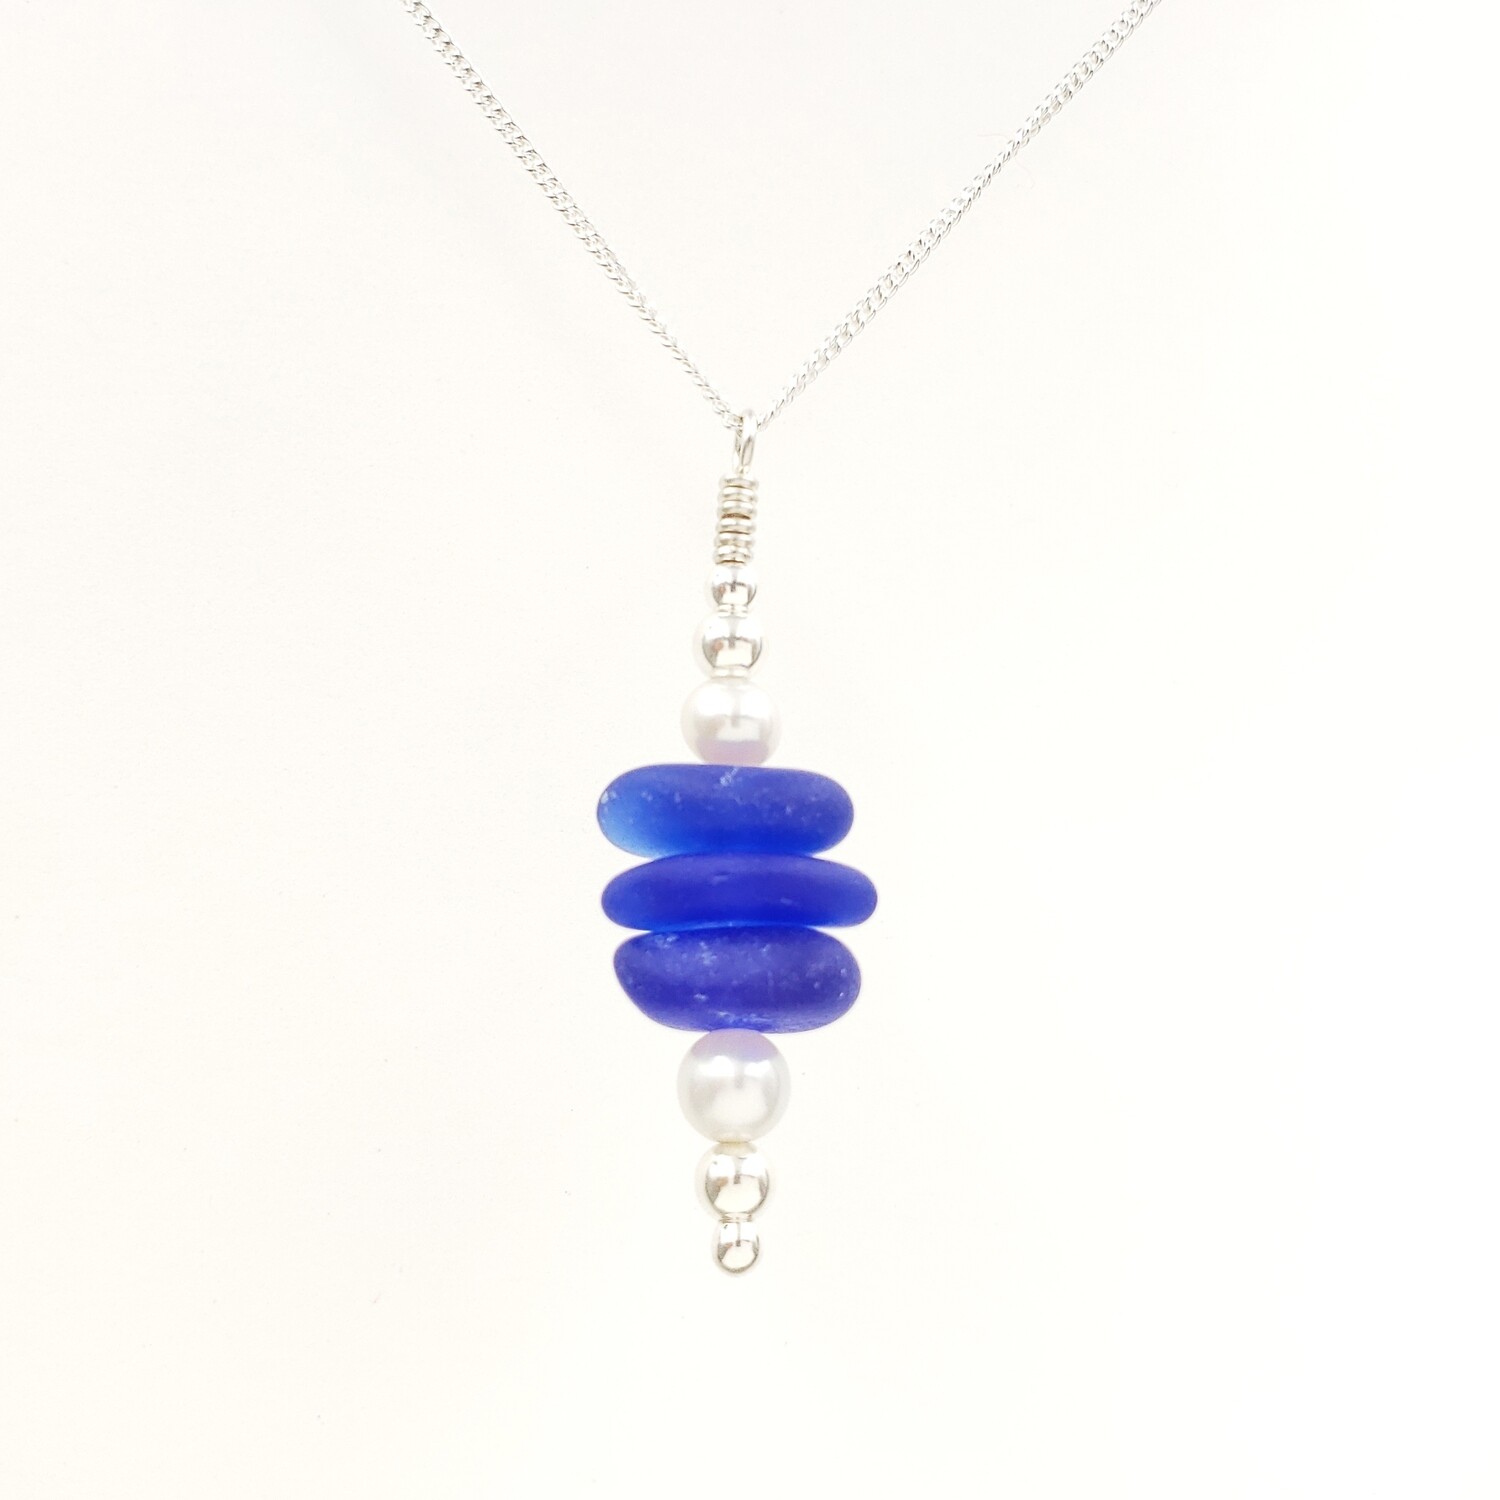 Cobalt Blue Lake Erie Beach Glass Stacking Necklace with Freshwater Pearls and Silver Beads